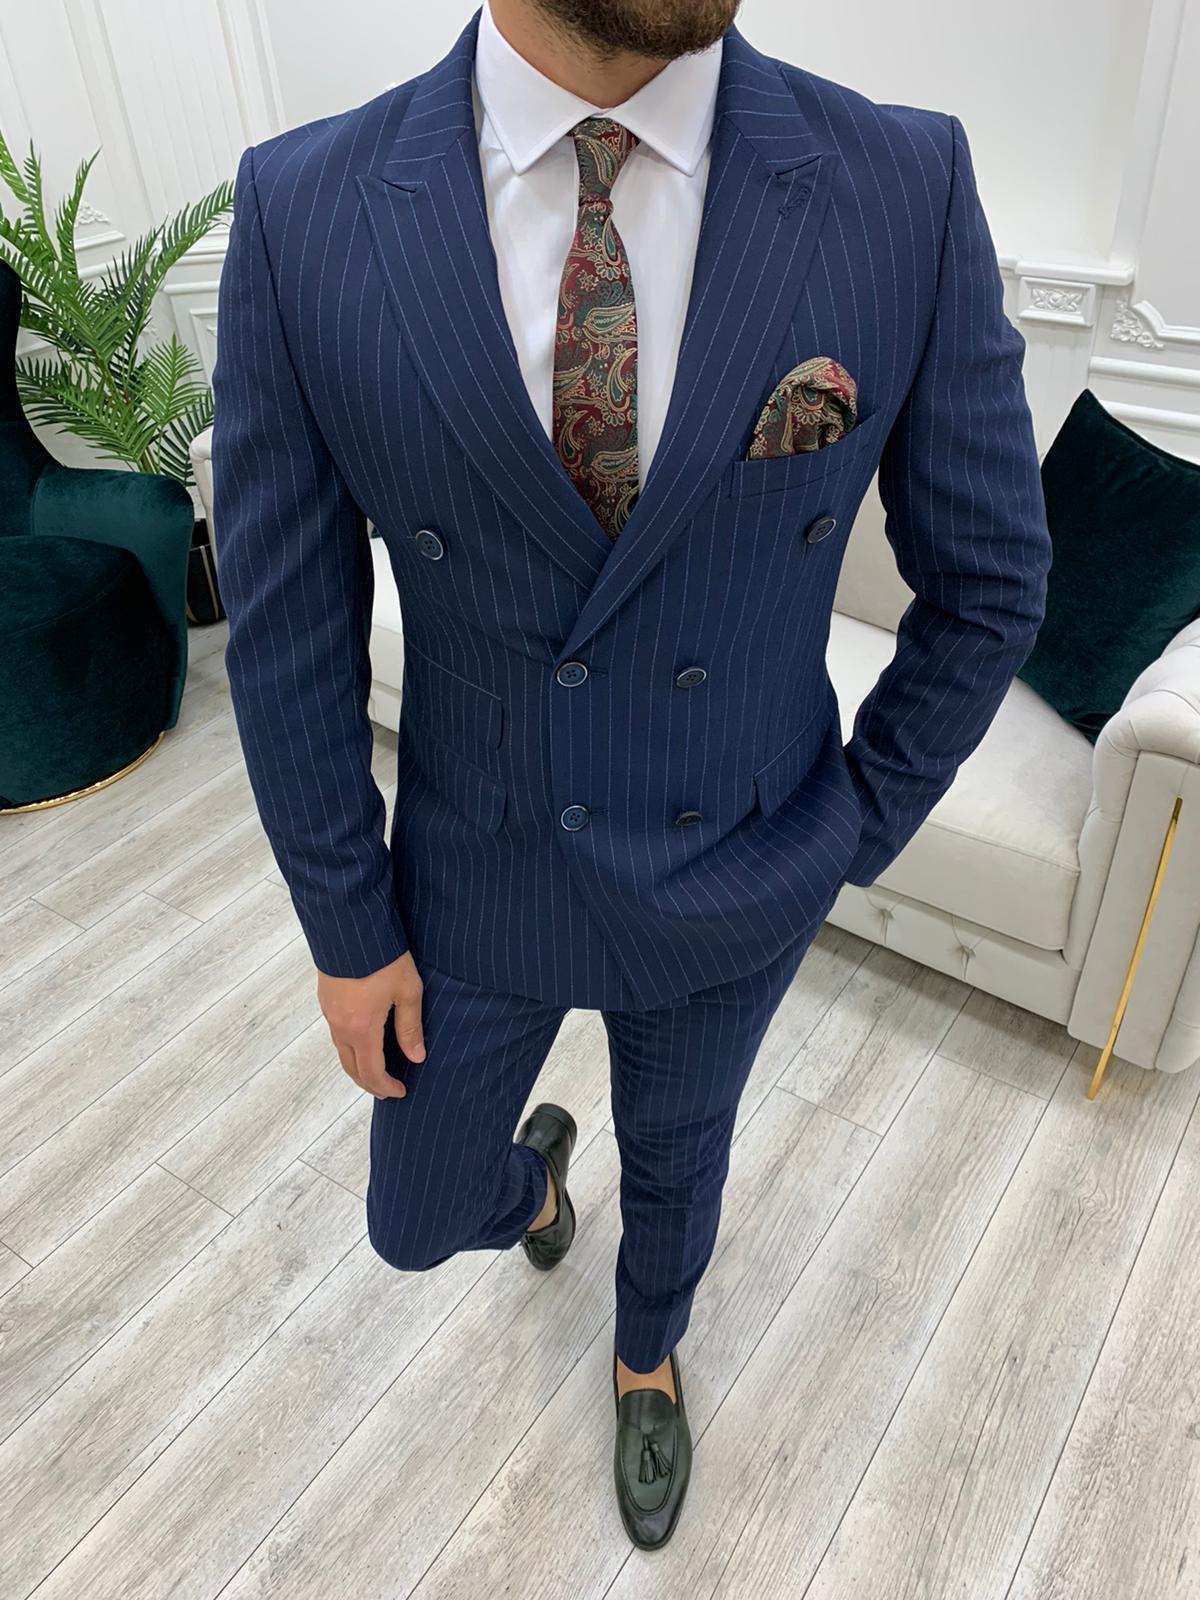 Buy Navy Blue Slim Fit Pinstripe Suit By With Free Shipping | tyello.com